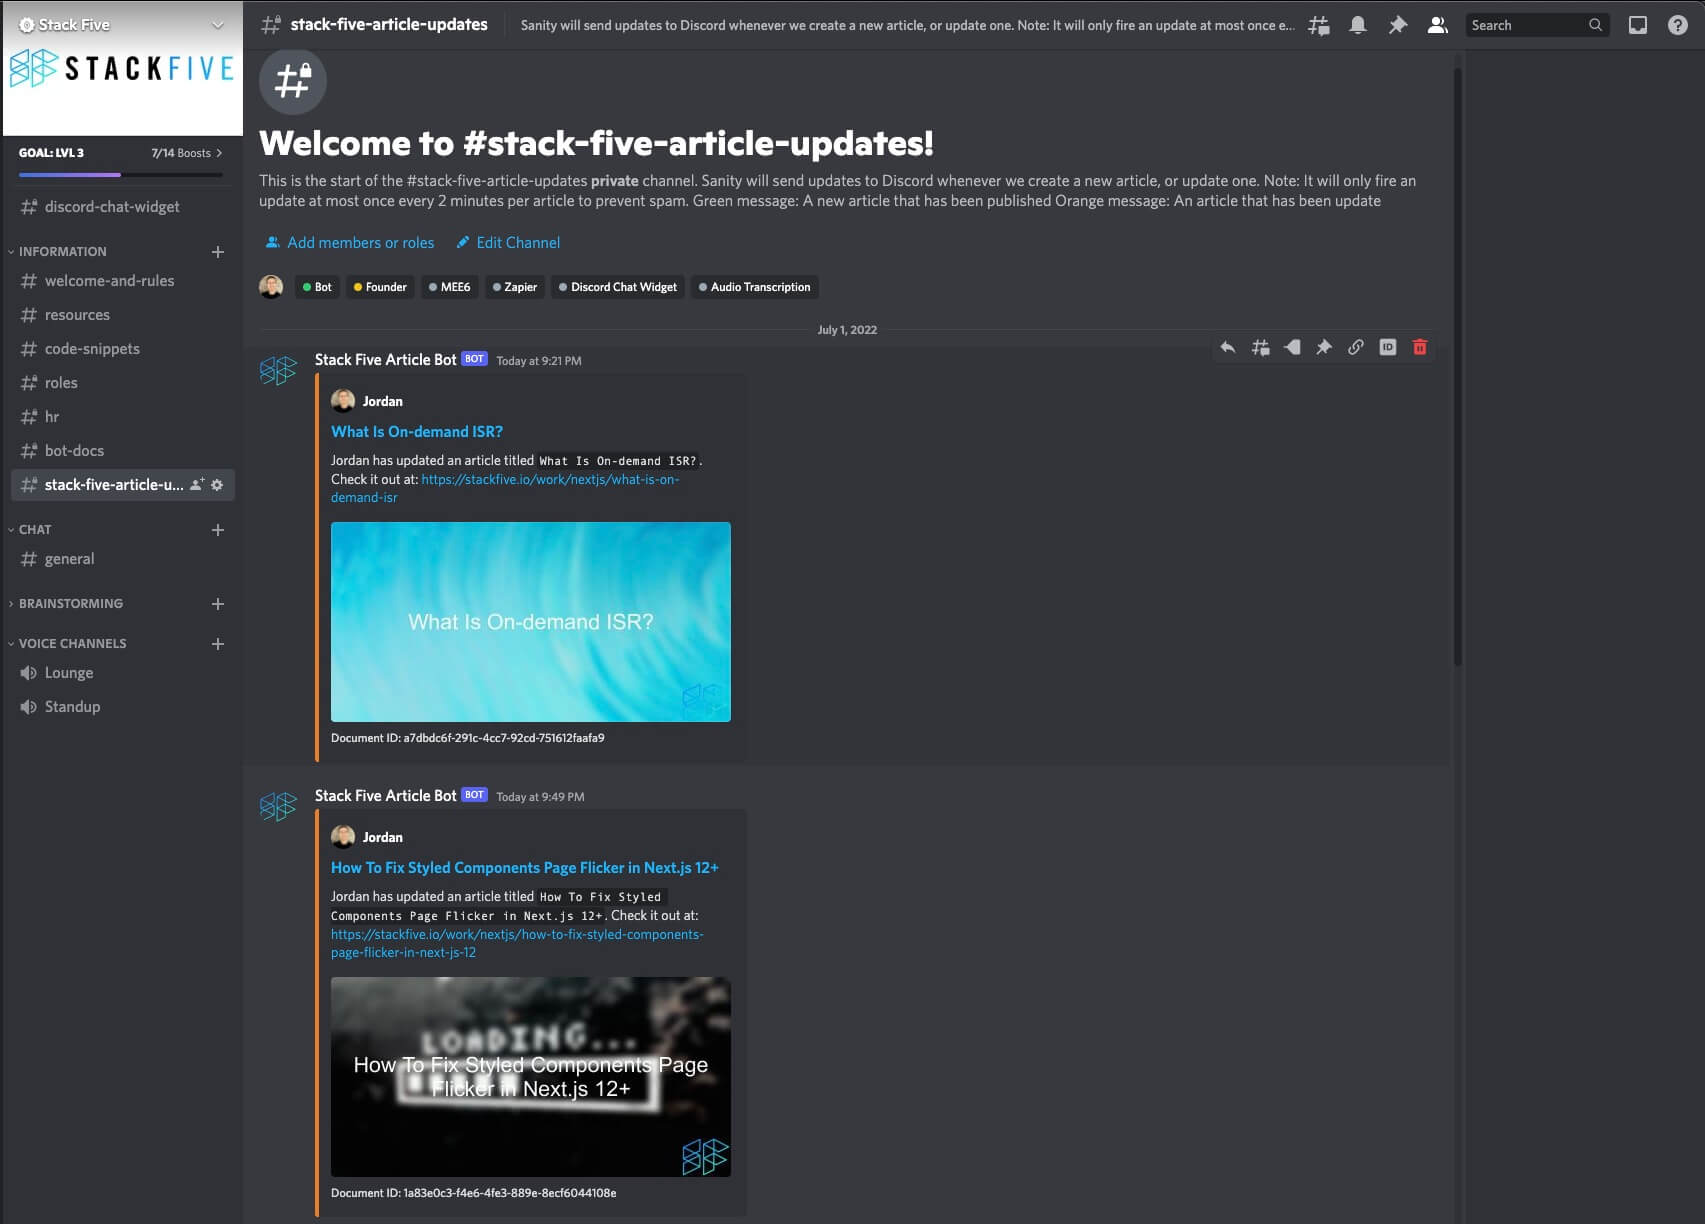 Our custom bot integration posting updates in our team's Discord server